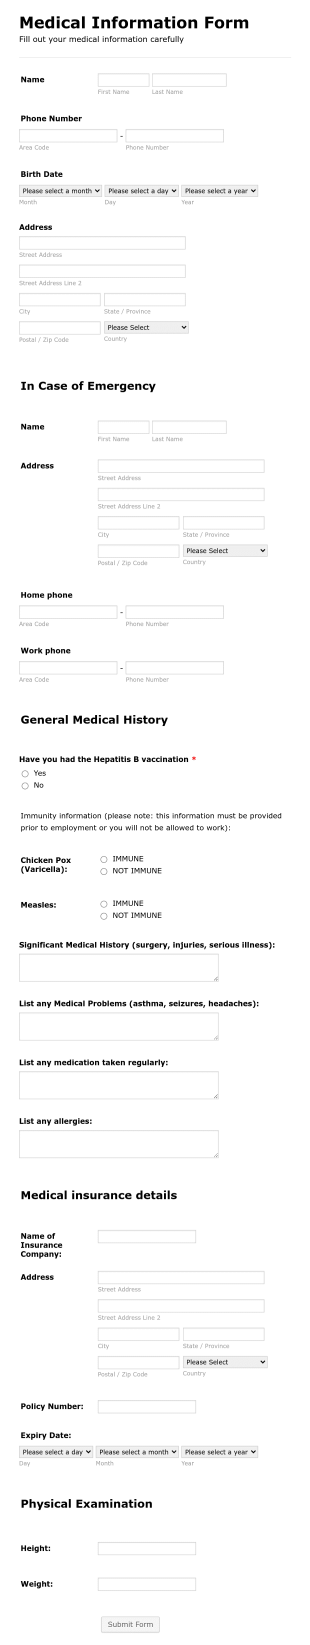 Medical Employment Information Form Template